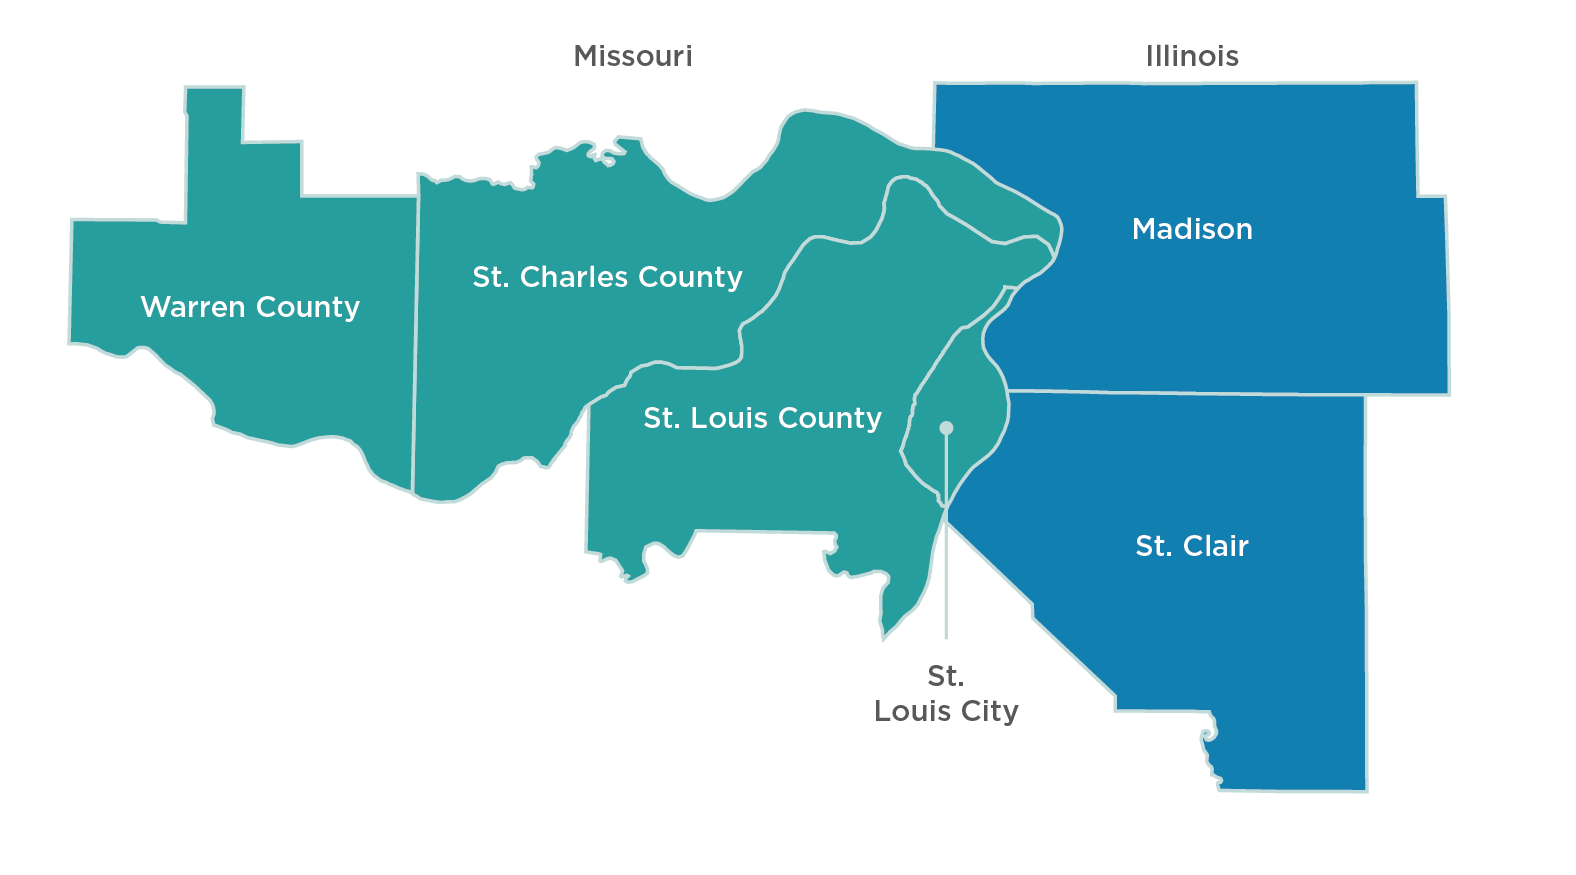 Map of Warren County, St. Charles County, St. Louis County, St. Louis City in Missouri, and Madison and St. Clair Counties in Illinois.